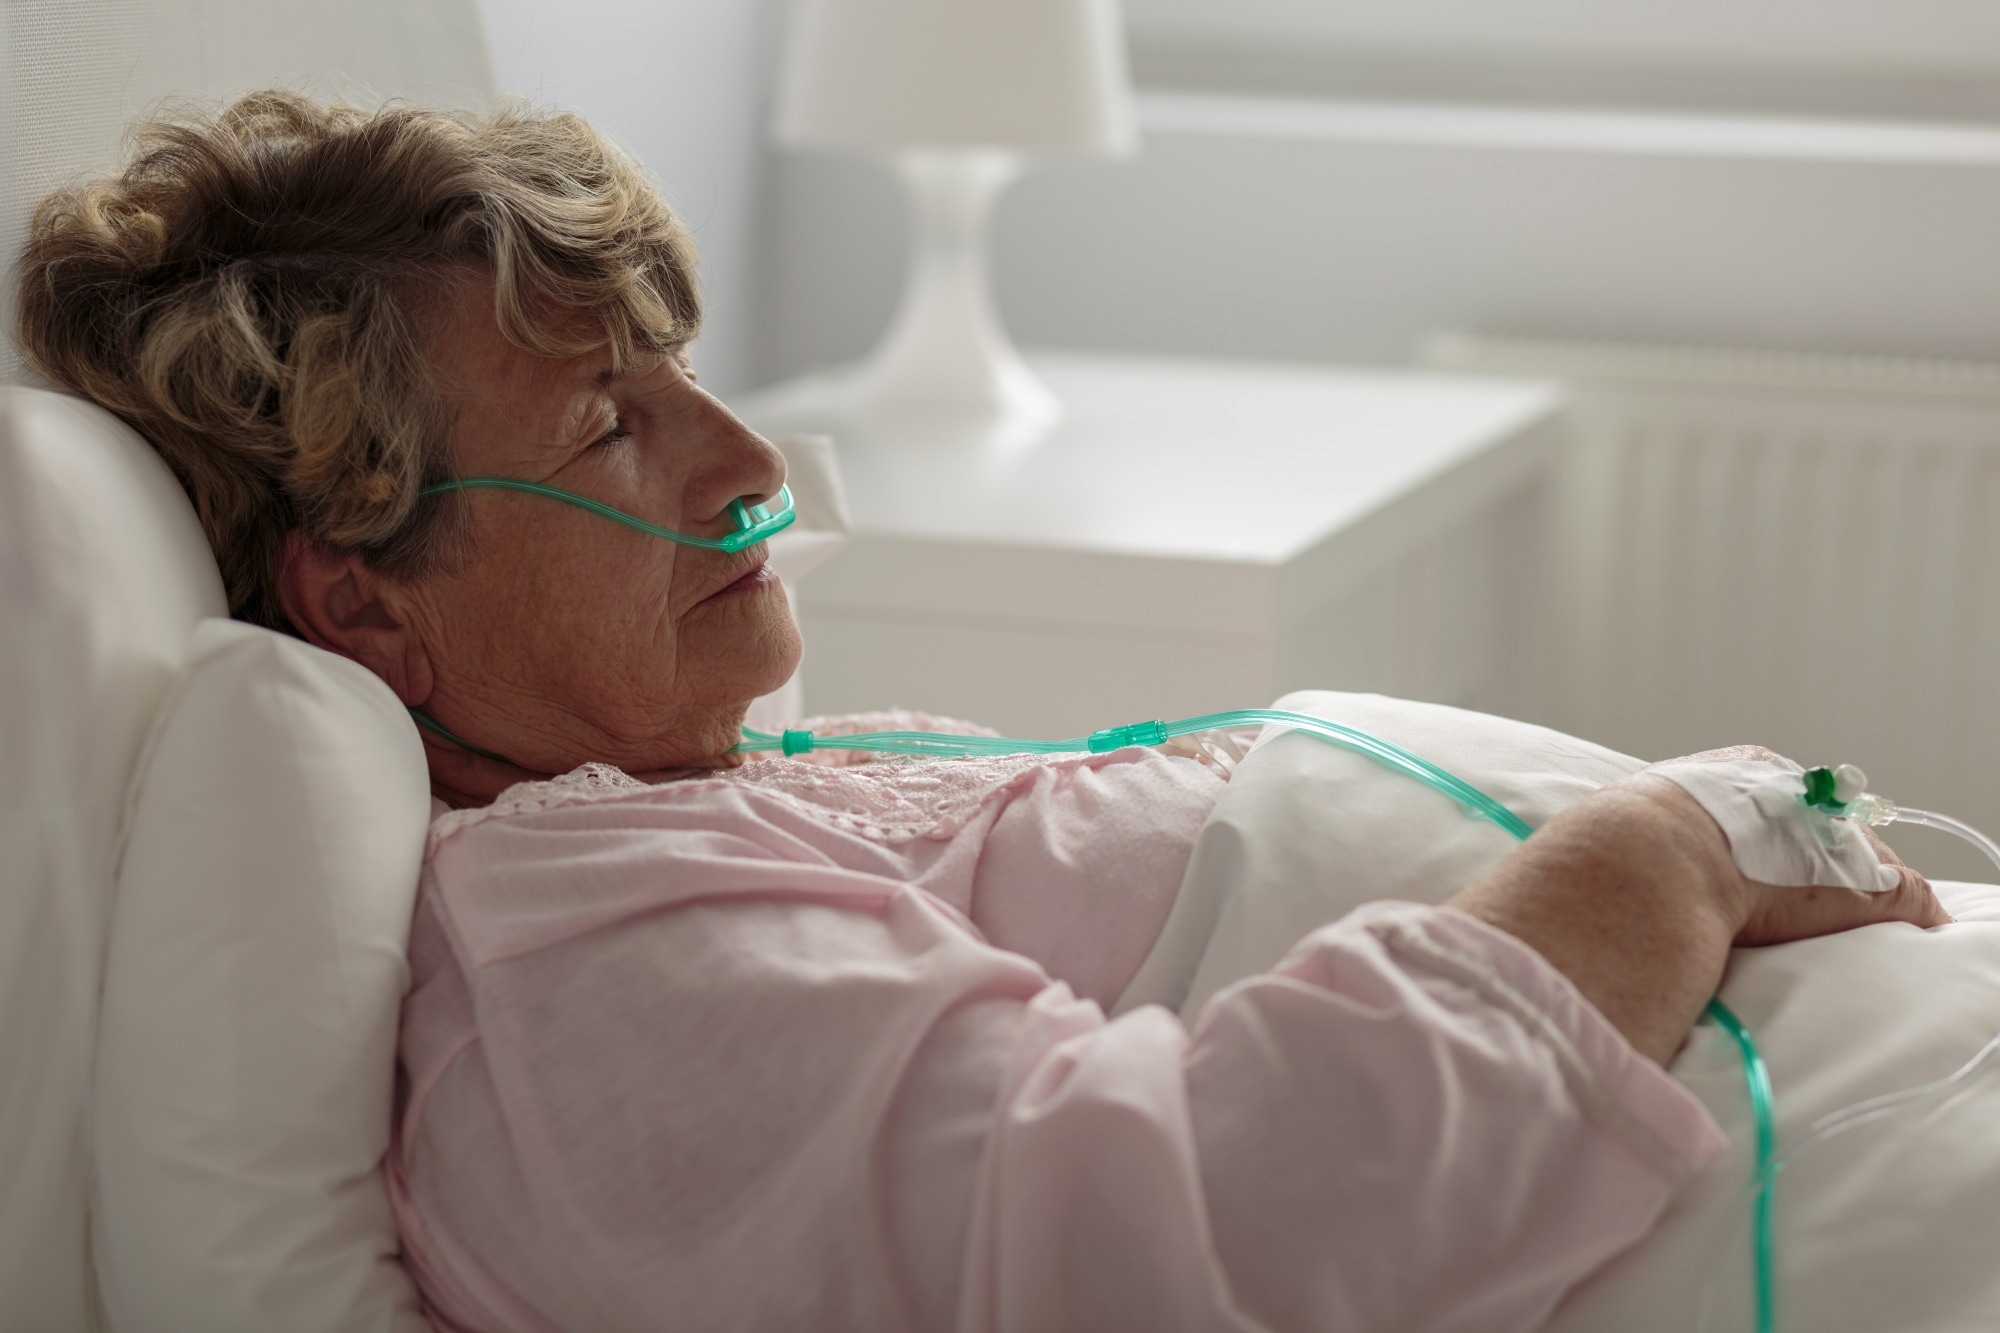 Study: Effects of sleep disturbance on dyspnoea and impaired lung function following hospital admission due to COVID-19 in the UK: a prospective multicentre cohort study. Image Credit / Ground Picture / Shutterstock